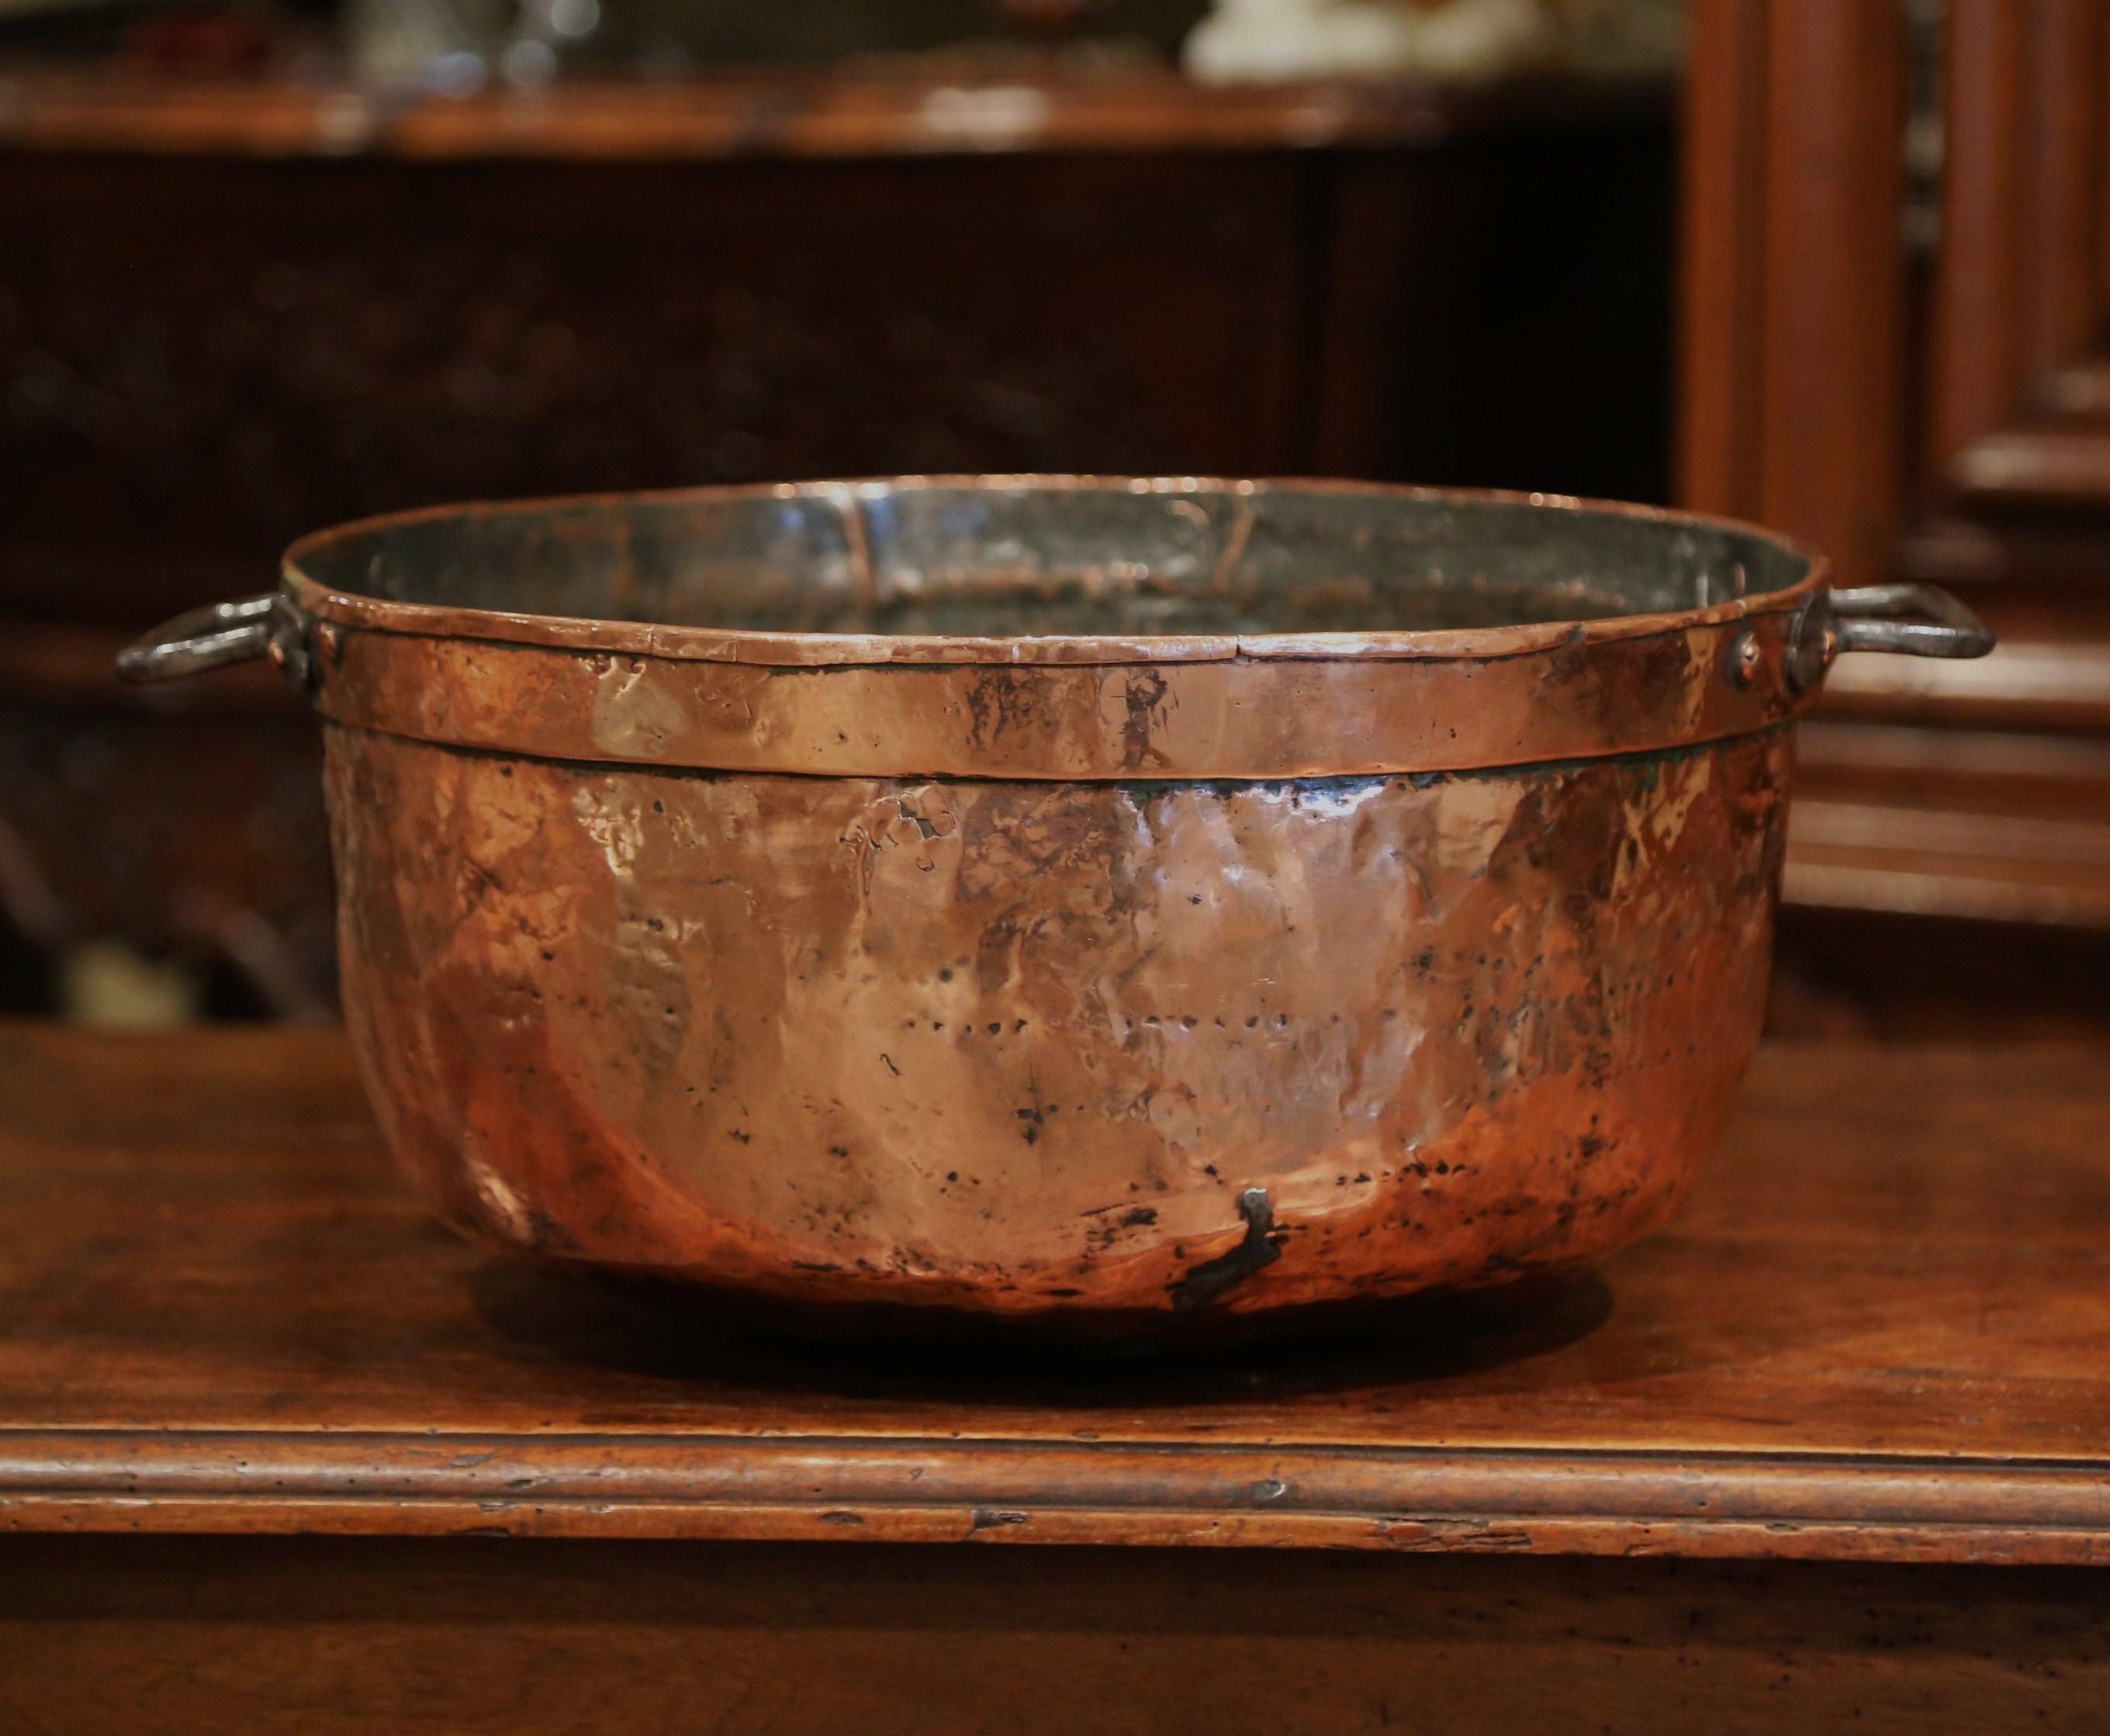 This large, antique, copper marmalade bowl was crafted in Normandy, France, circa 1860. The decorative round “Bassine a Confiture” (jelly bowl), features two forged iron handles on the sides attached with rivets. The simple, traditional kitchen